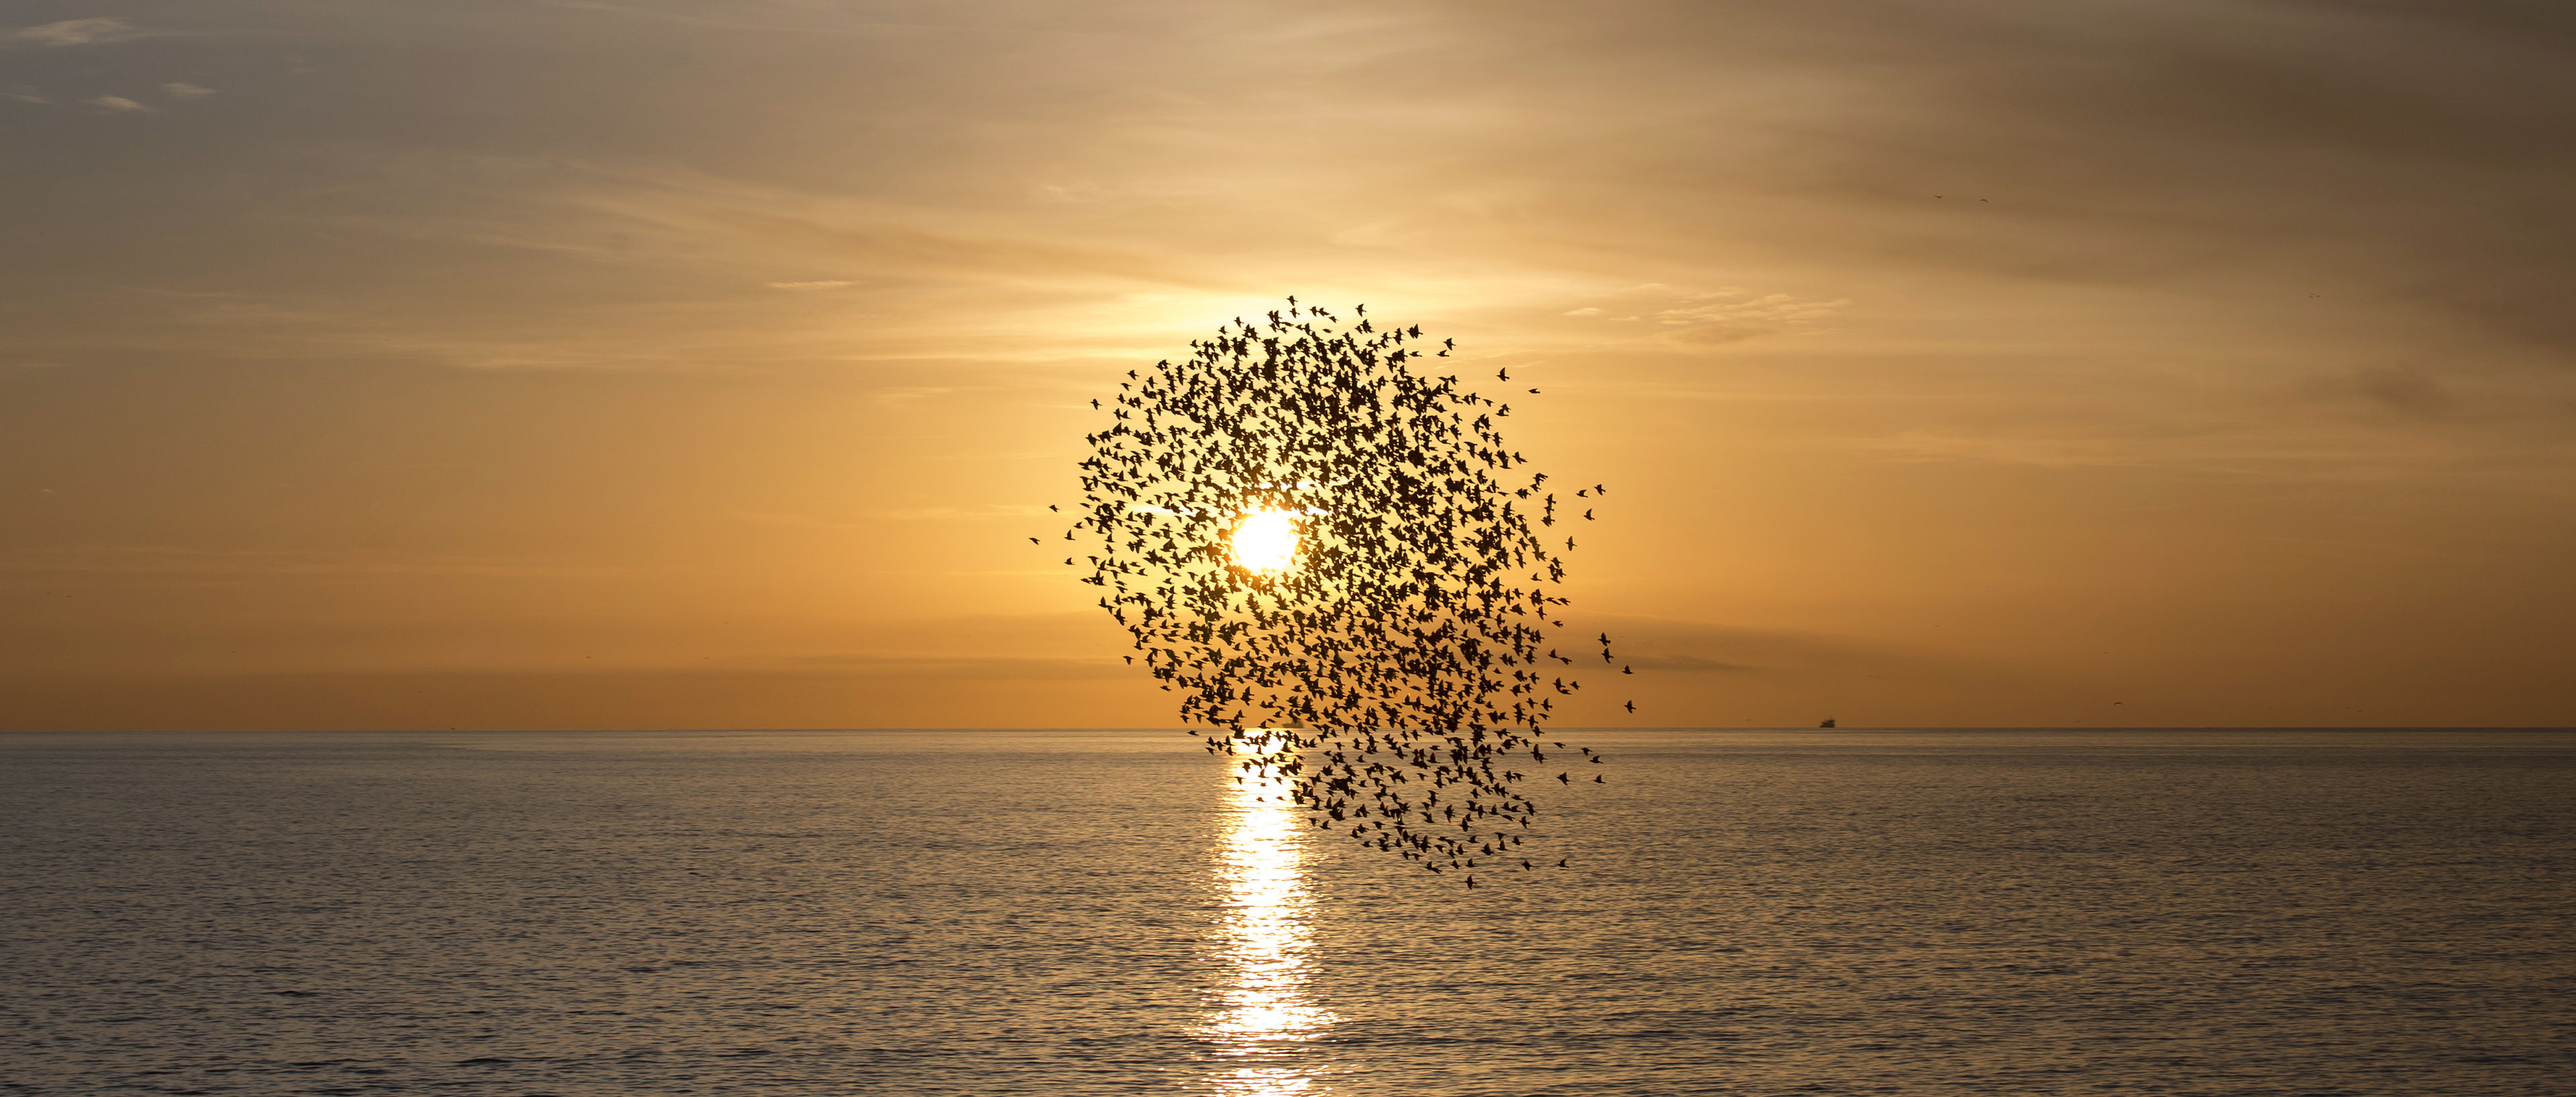 starlings at sunset taken from brighton palace pier